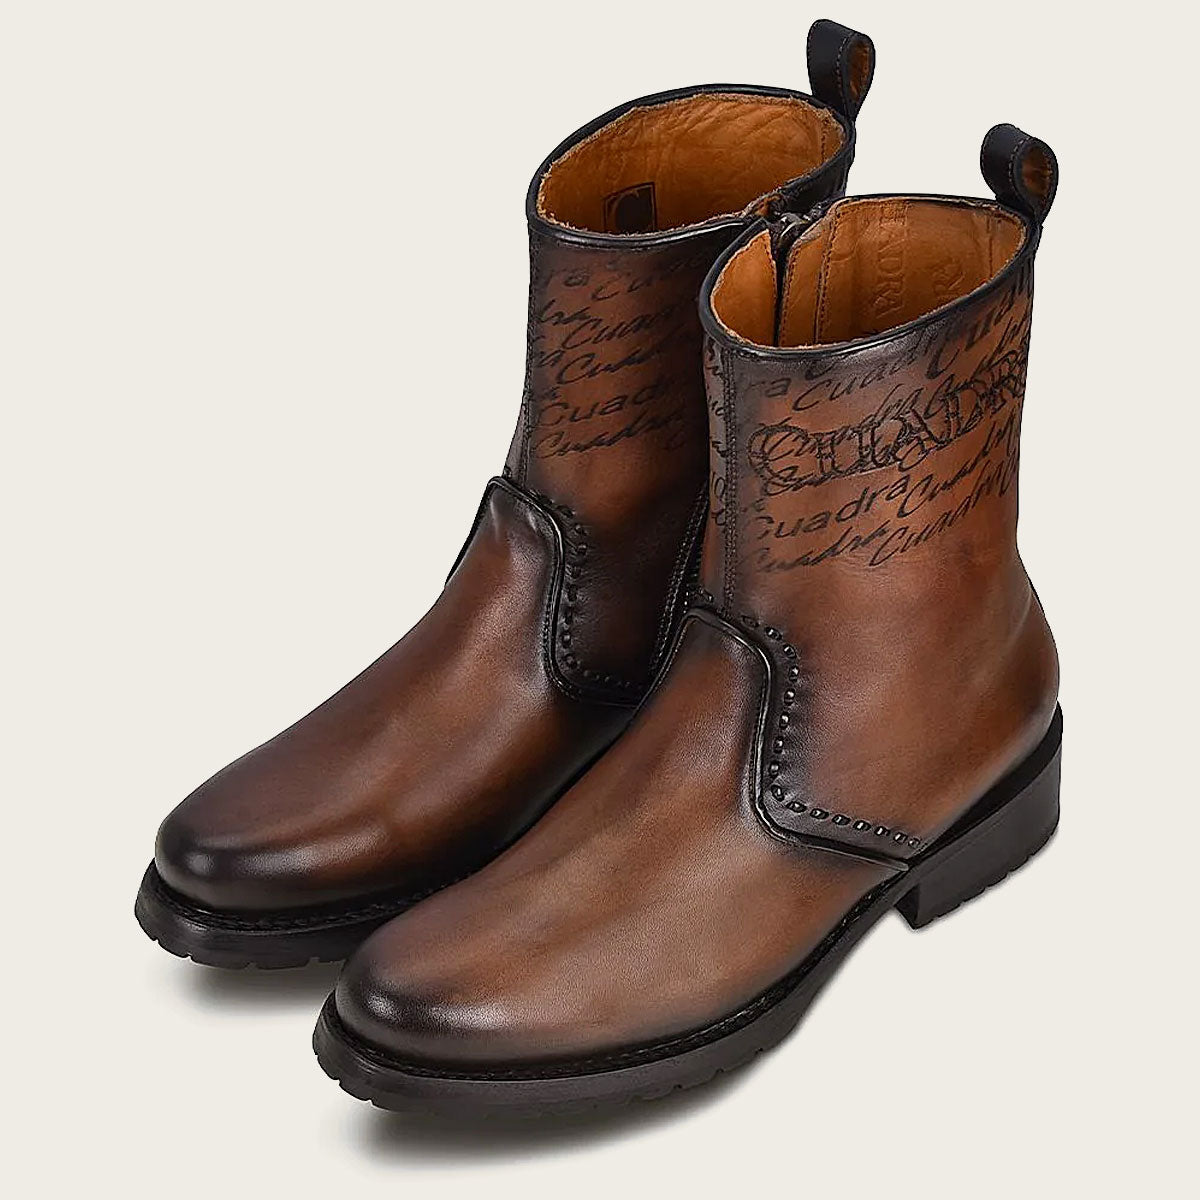 Cuadra logo embroidery and laser engraving on honey leather boot